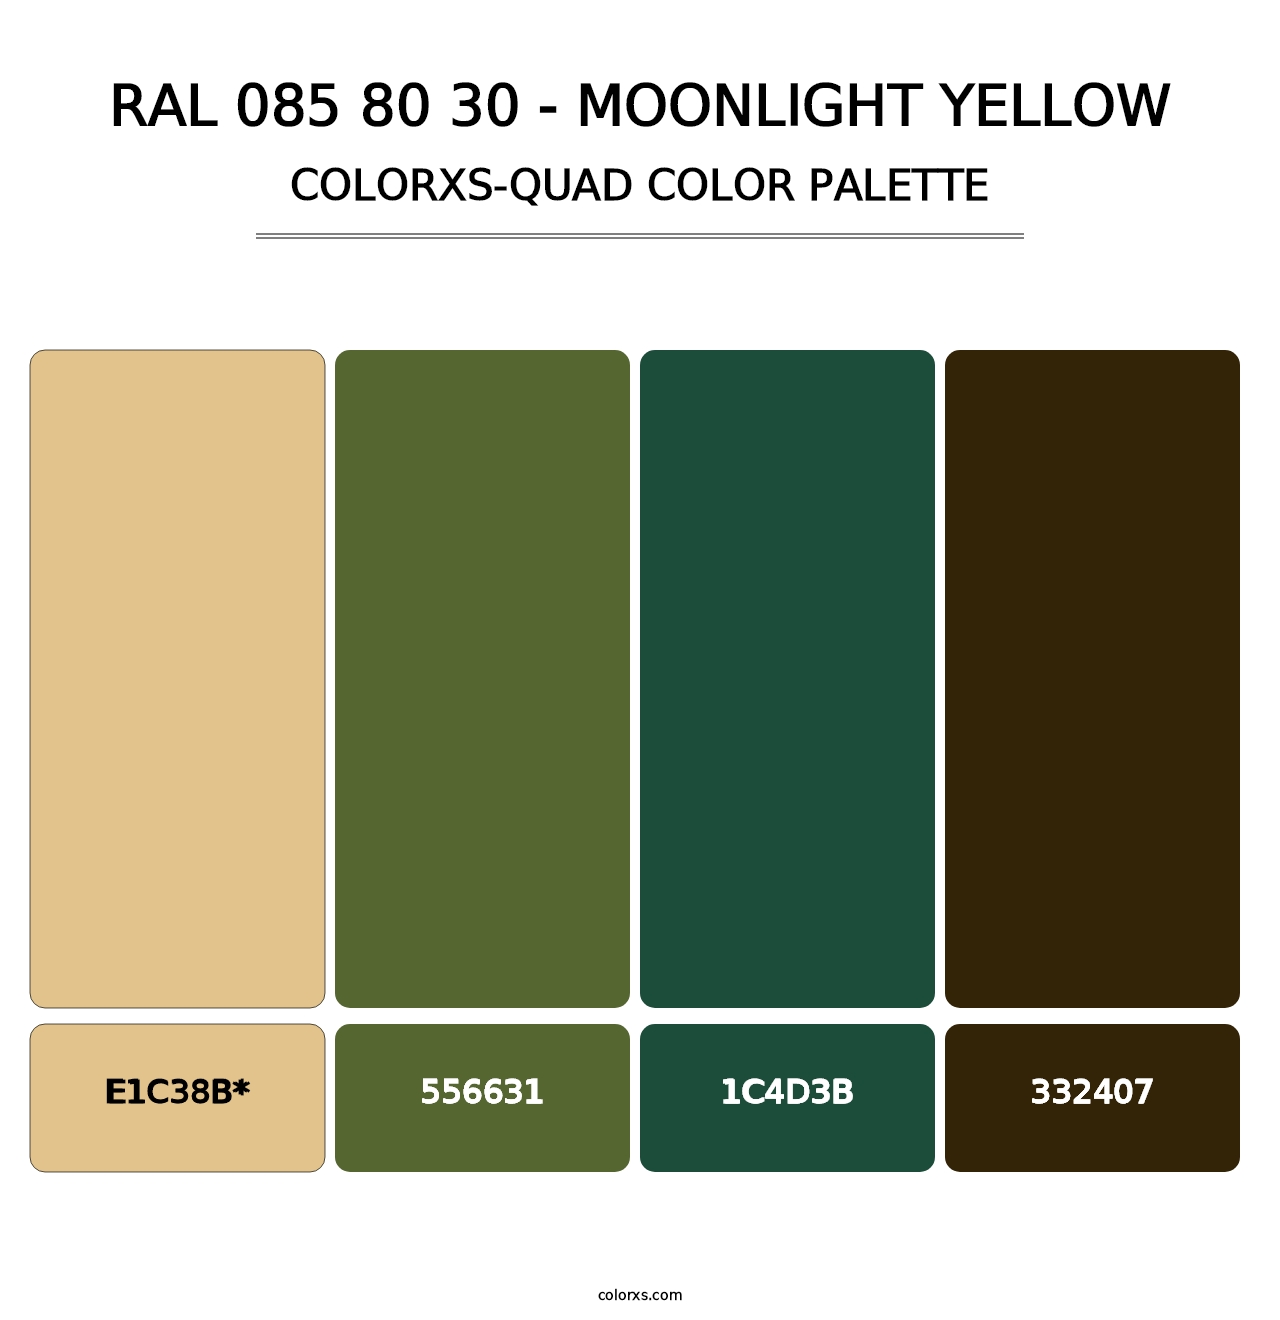 RAL 085 80 30 - Moonlight Yellow - Colorxs Quad Palette